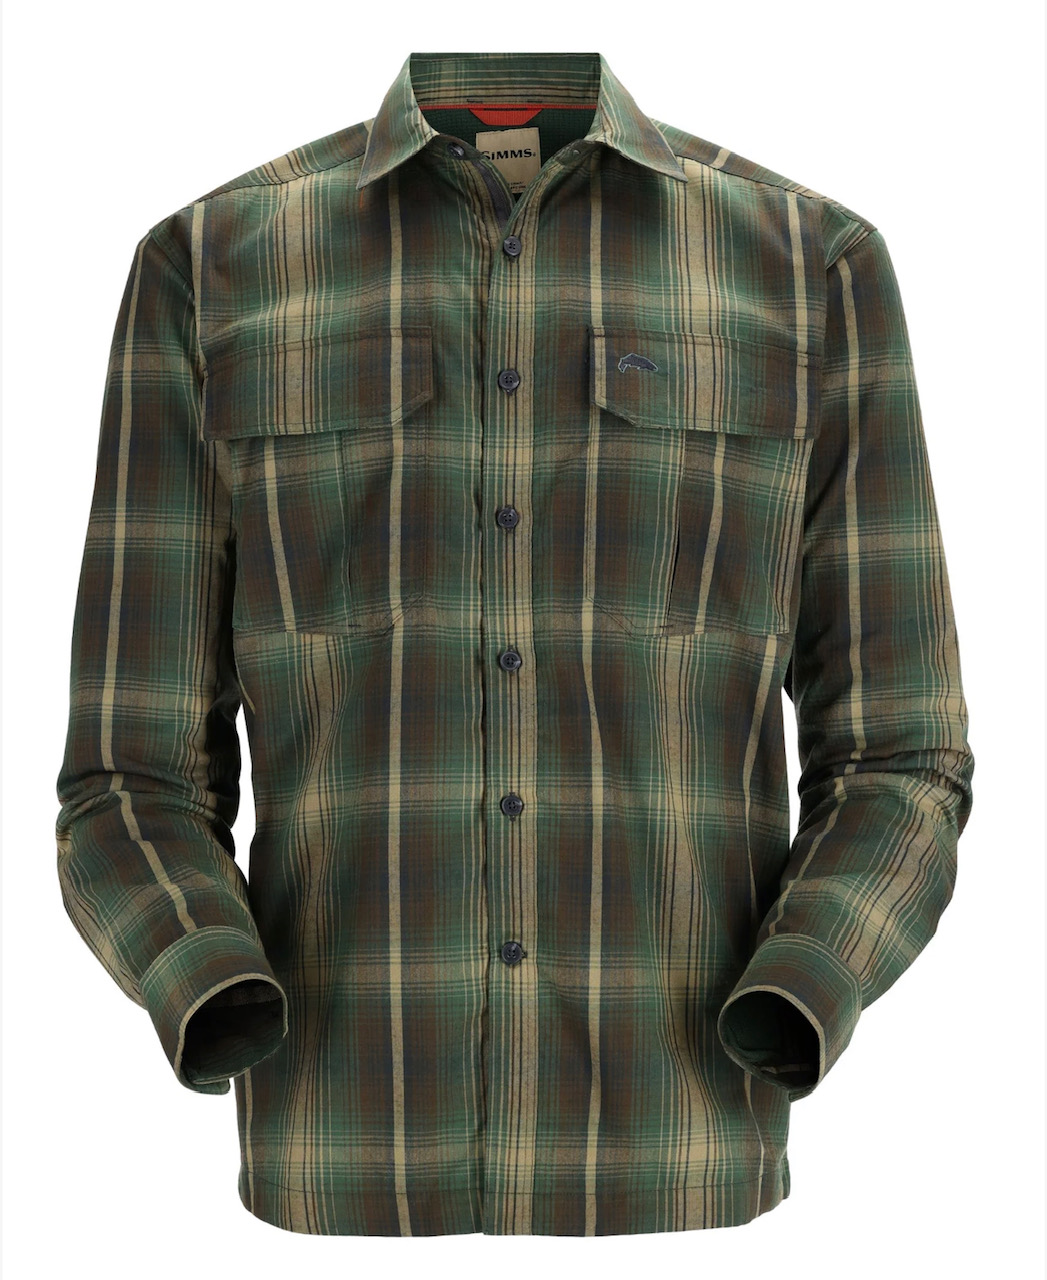 Simms M's Coldweather Shirt - Forest Hickory Plaid - XL